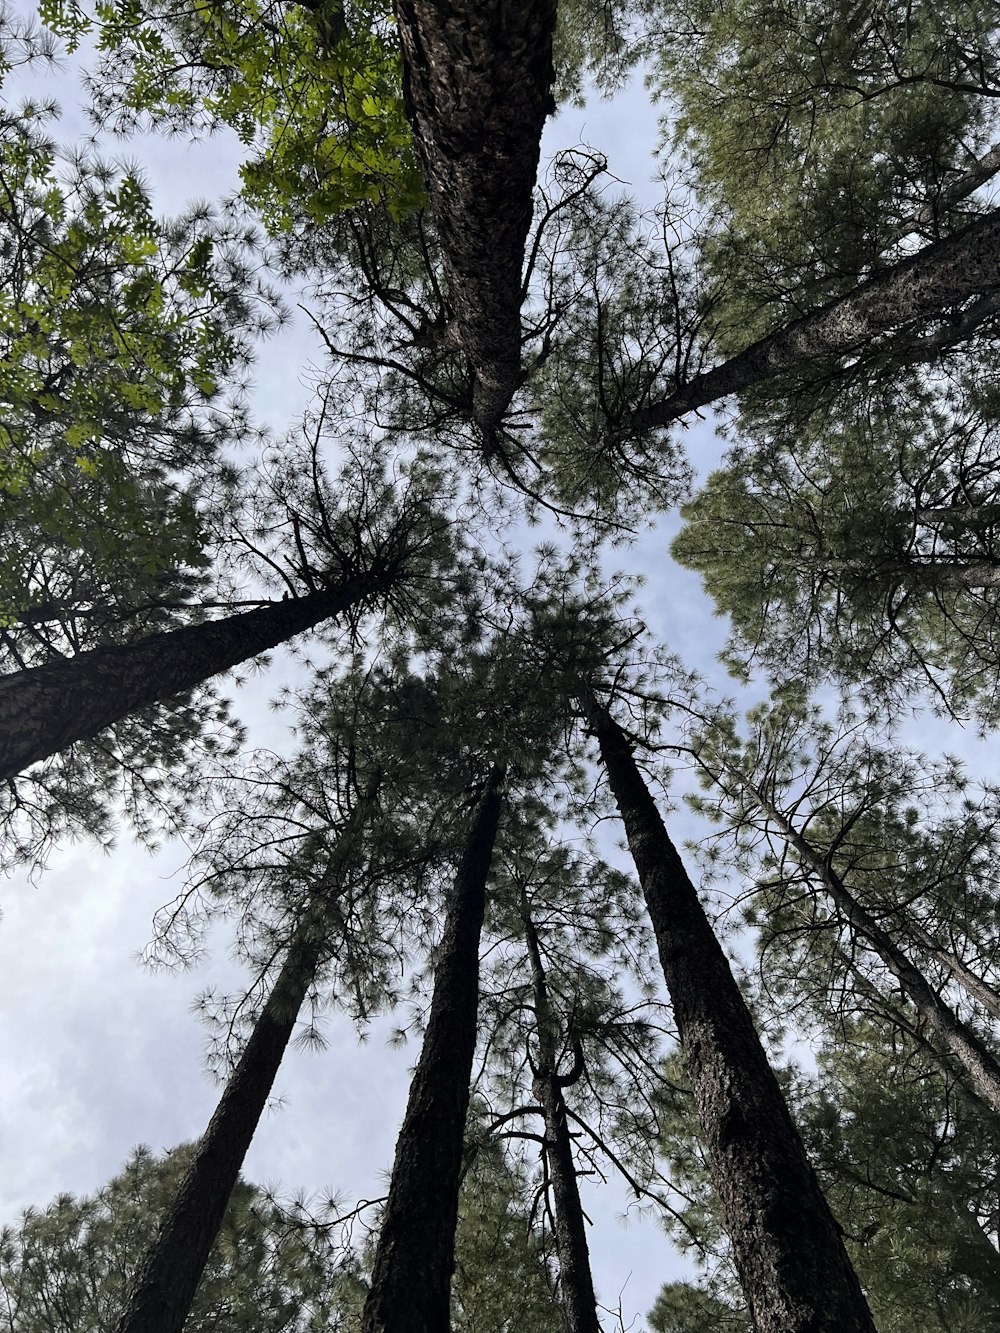 looking up at tall trees in a forest